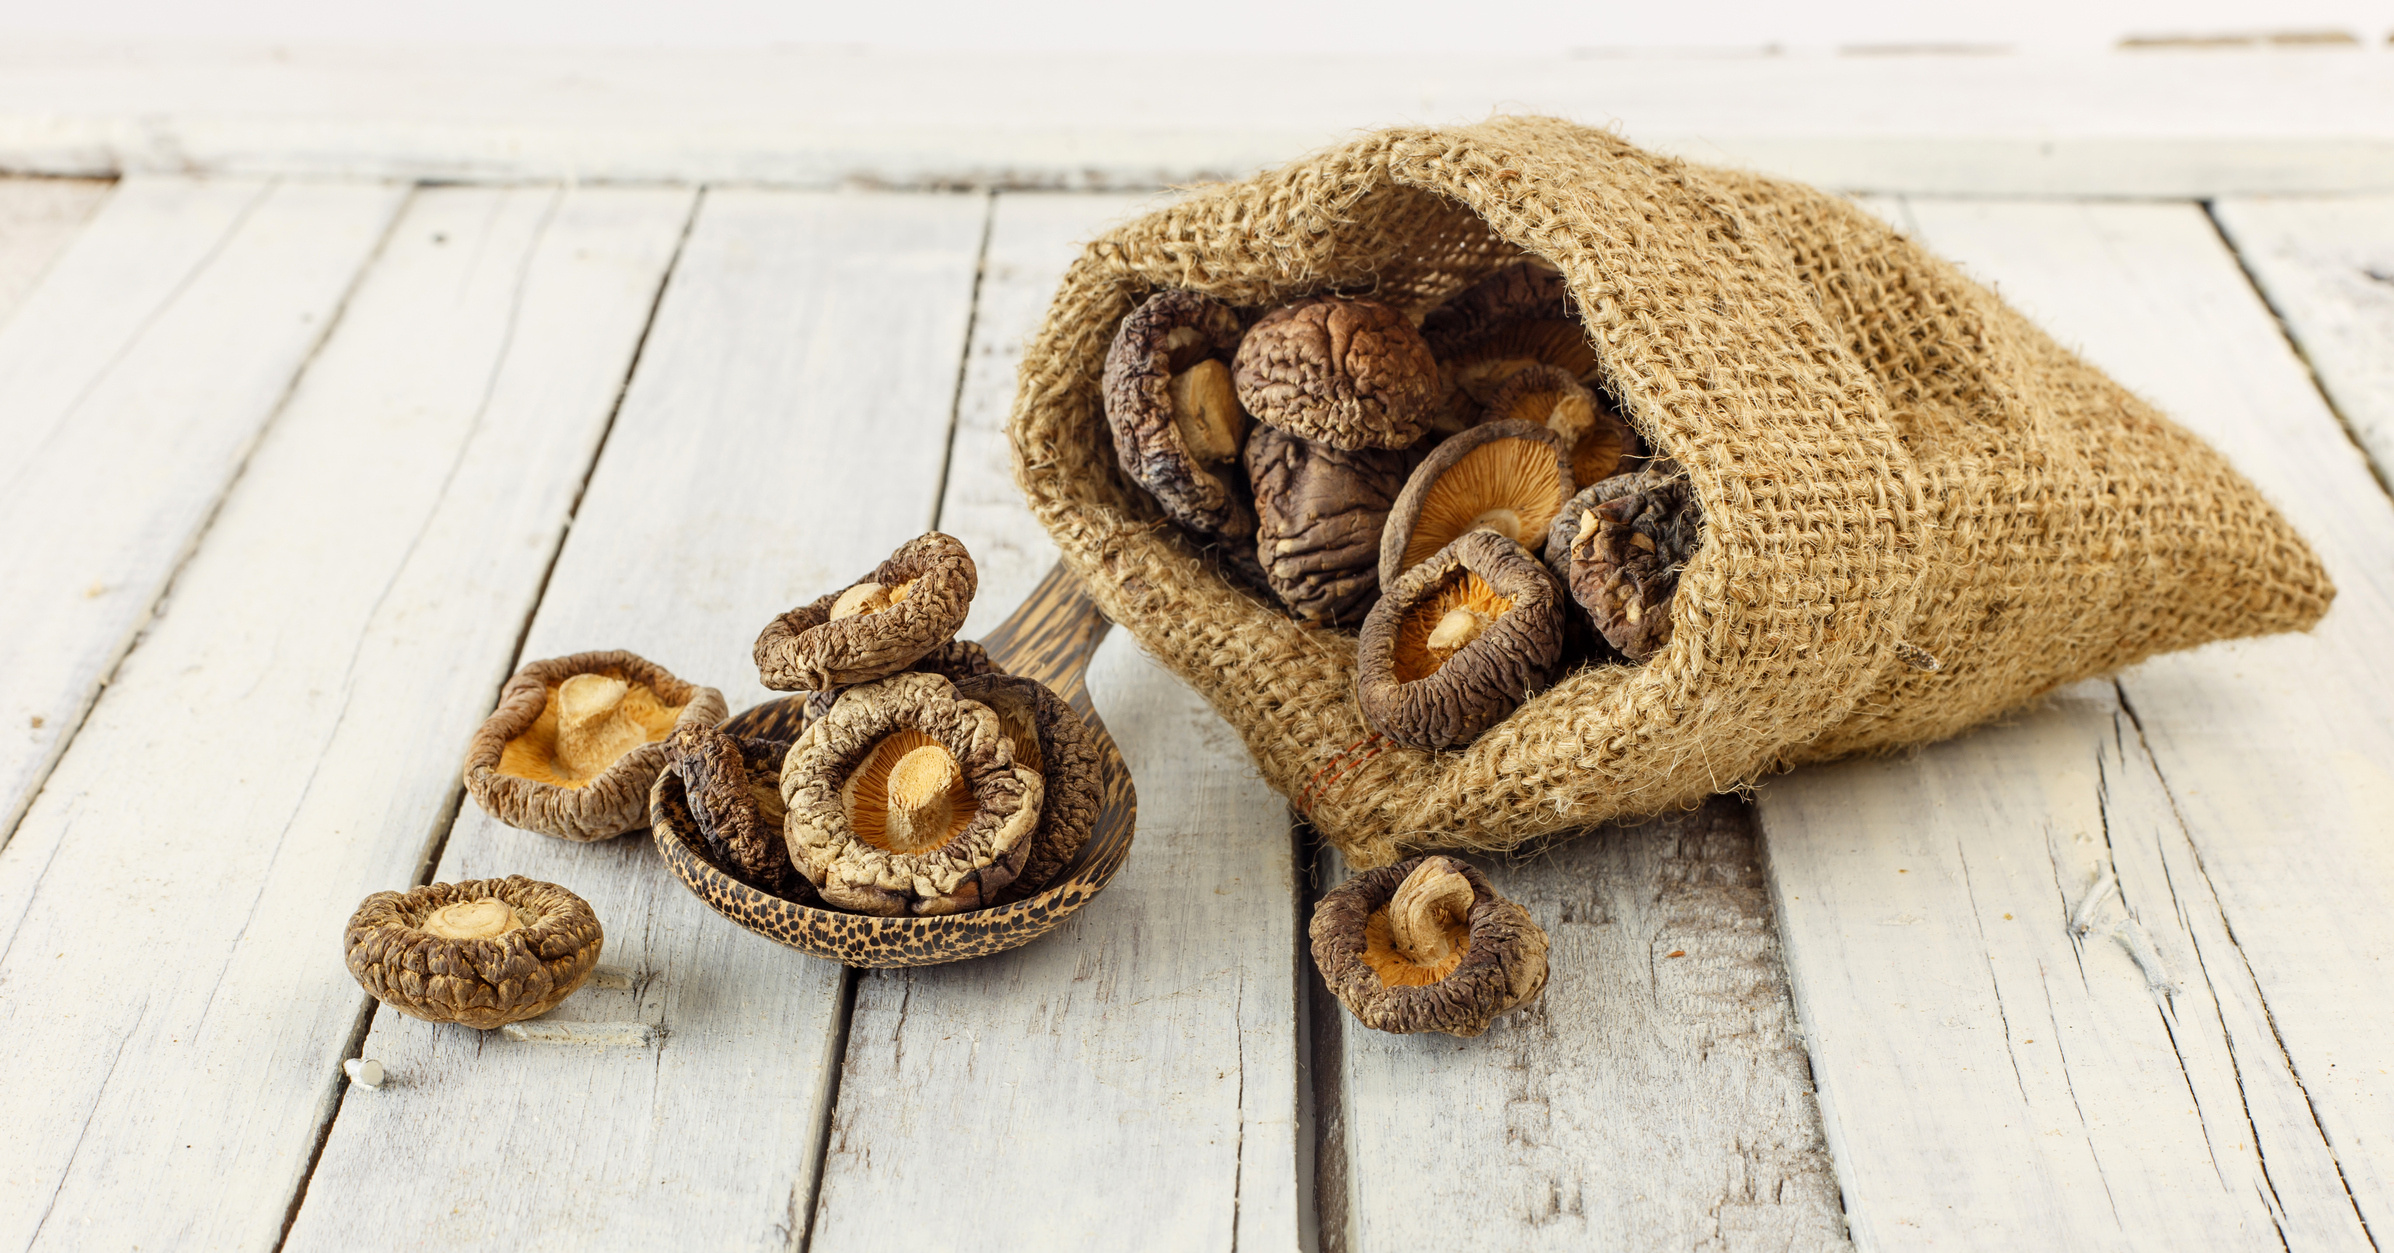 Shiitake knowledge and preparation, Gourmet ingredients, Fine dining insights, Culinary expertise, 2400x1260 HD Desktop